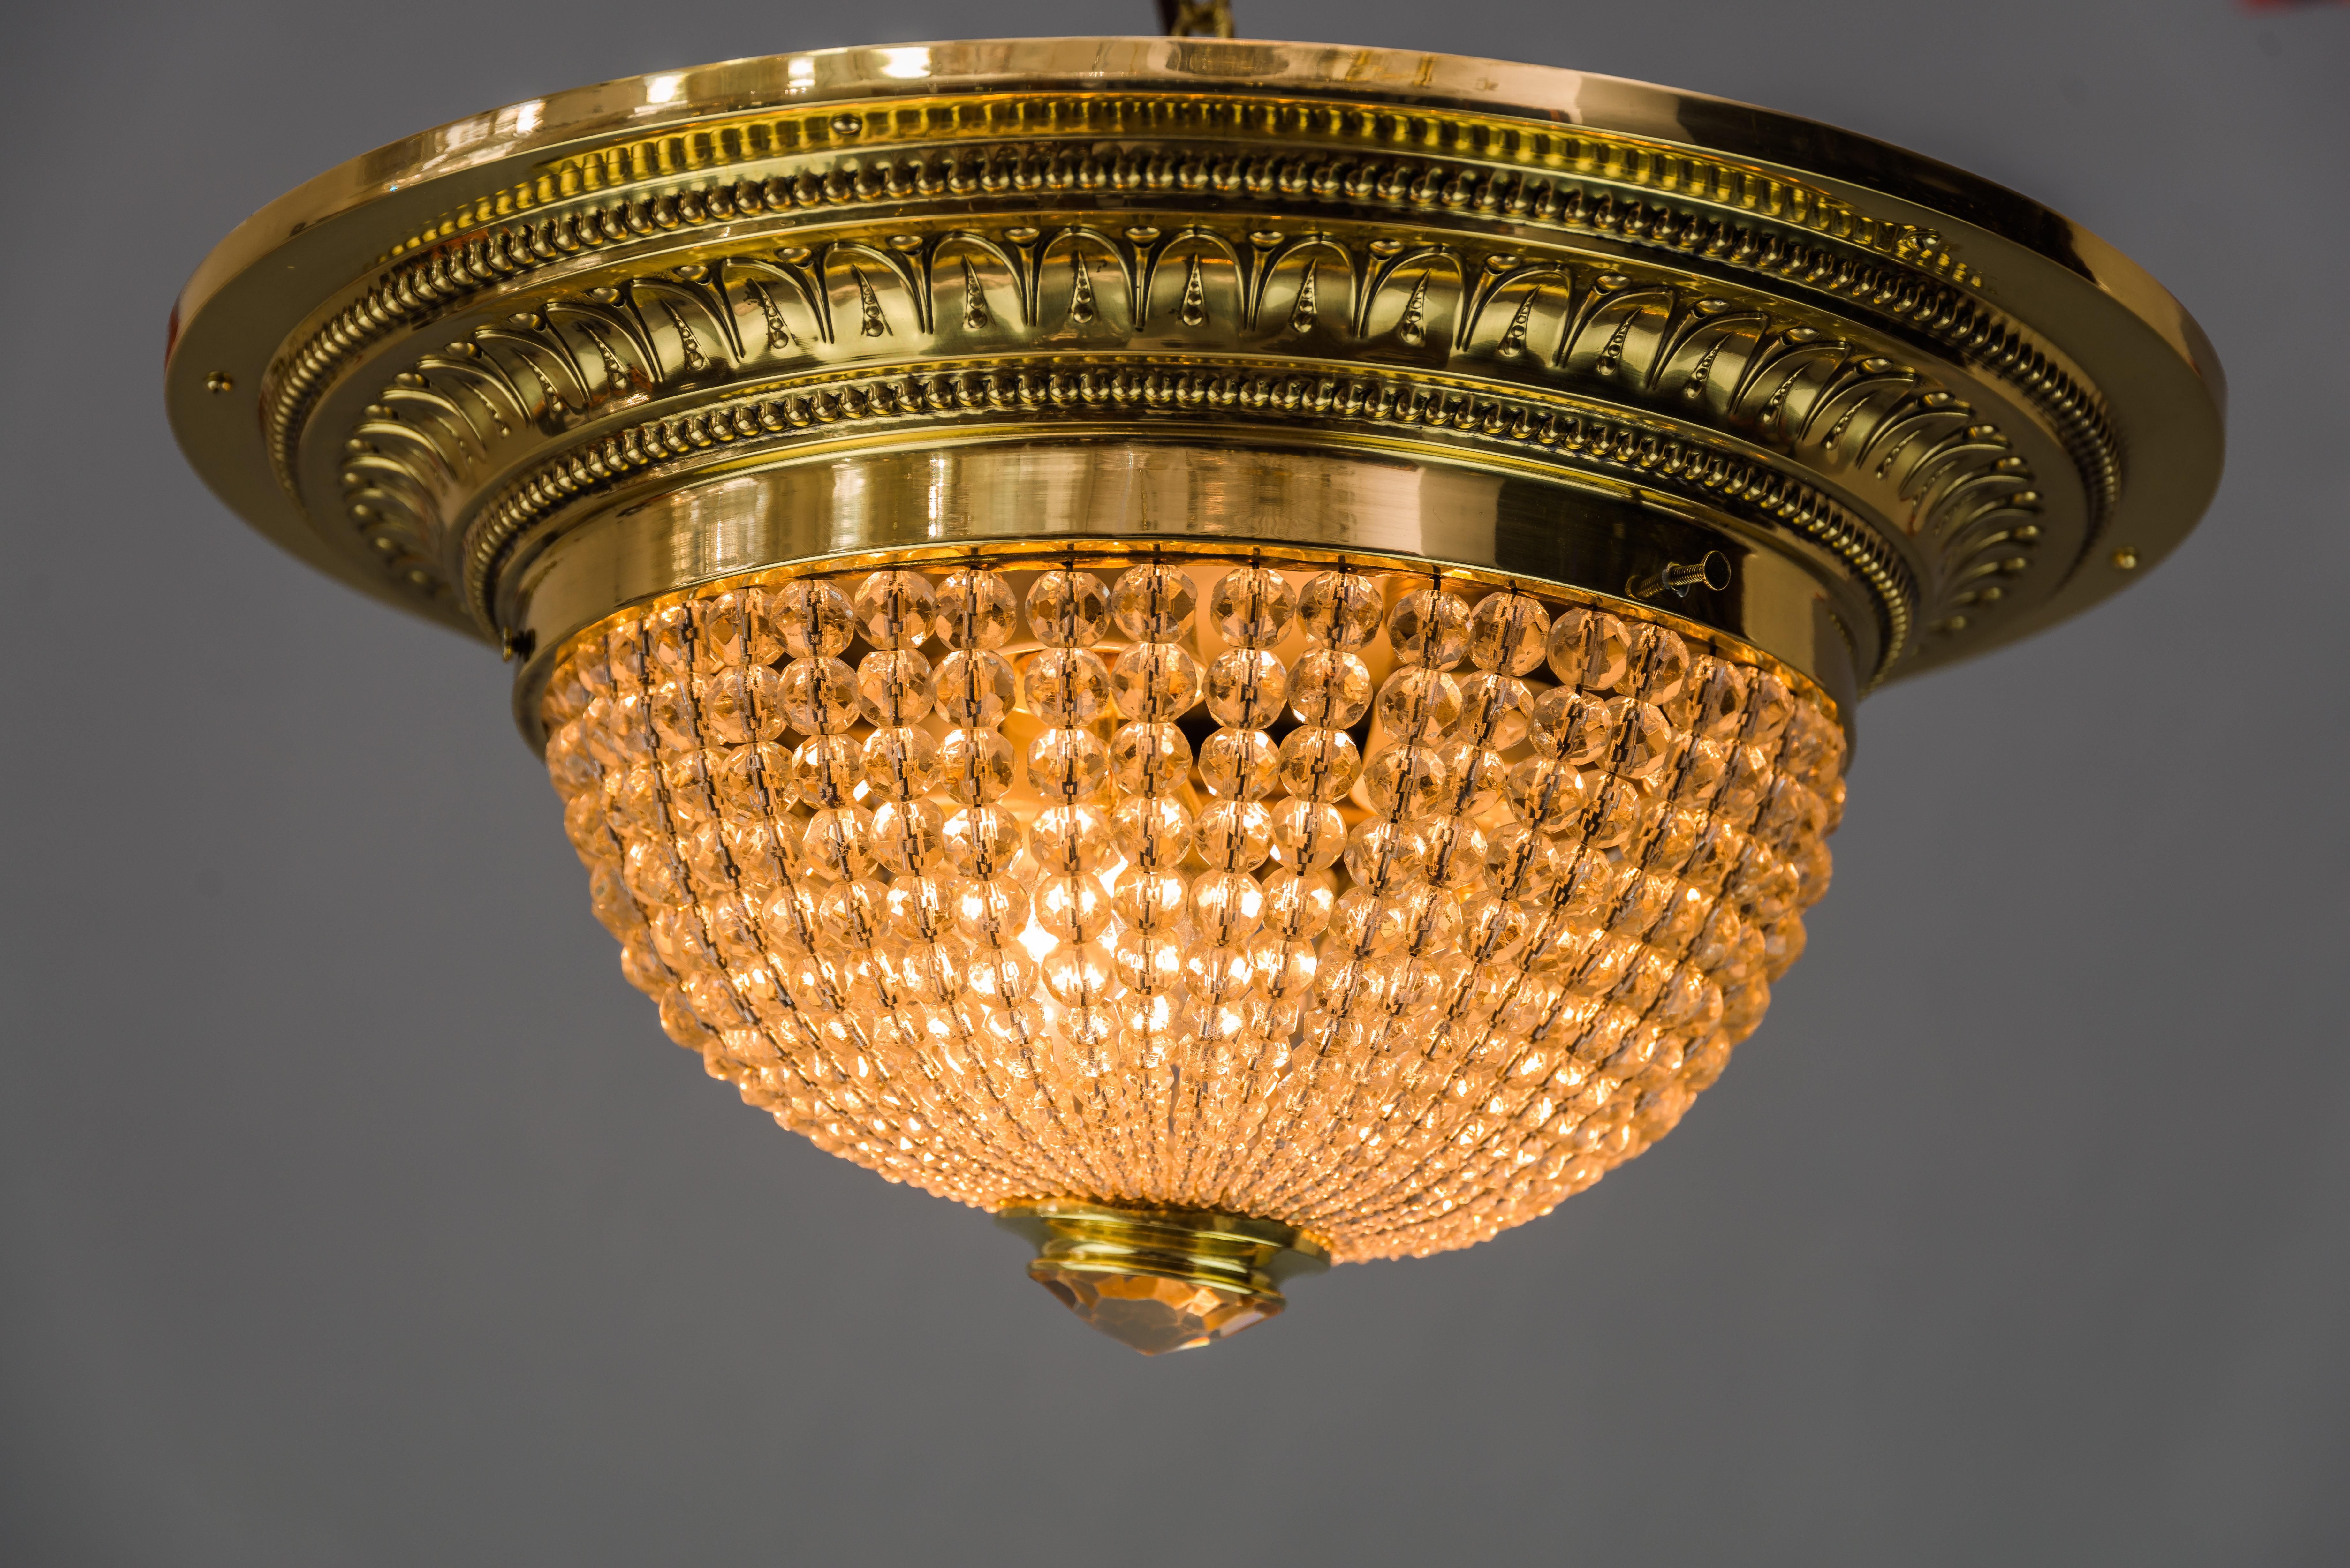 Early 20th Century Art Deco Ceiling Lamp with Small Cut Glass Balls, circa 1920s For Sale